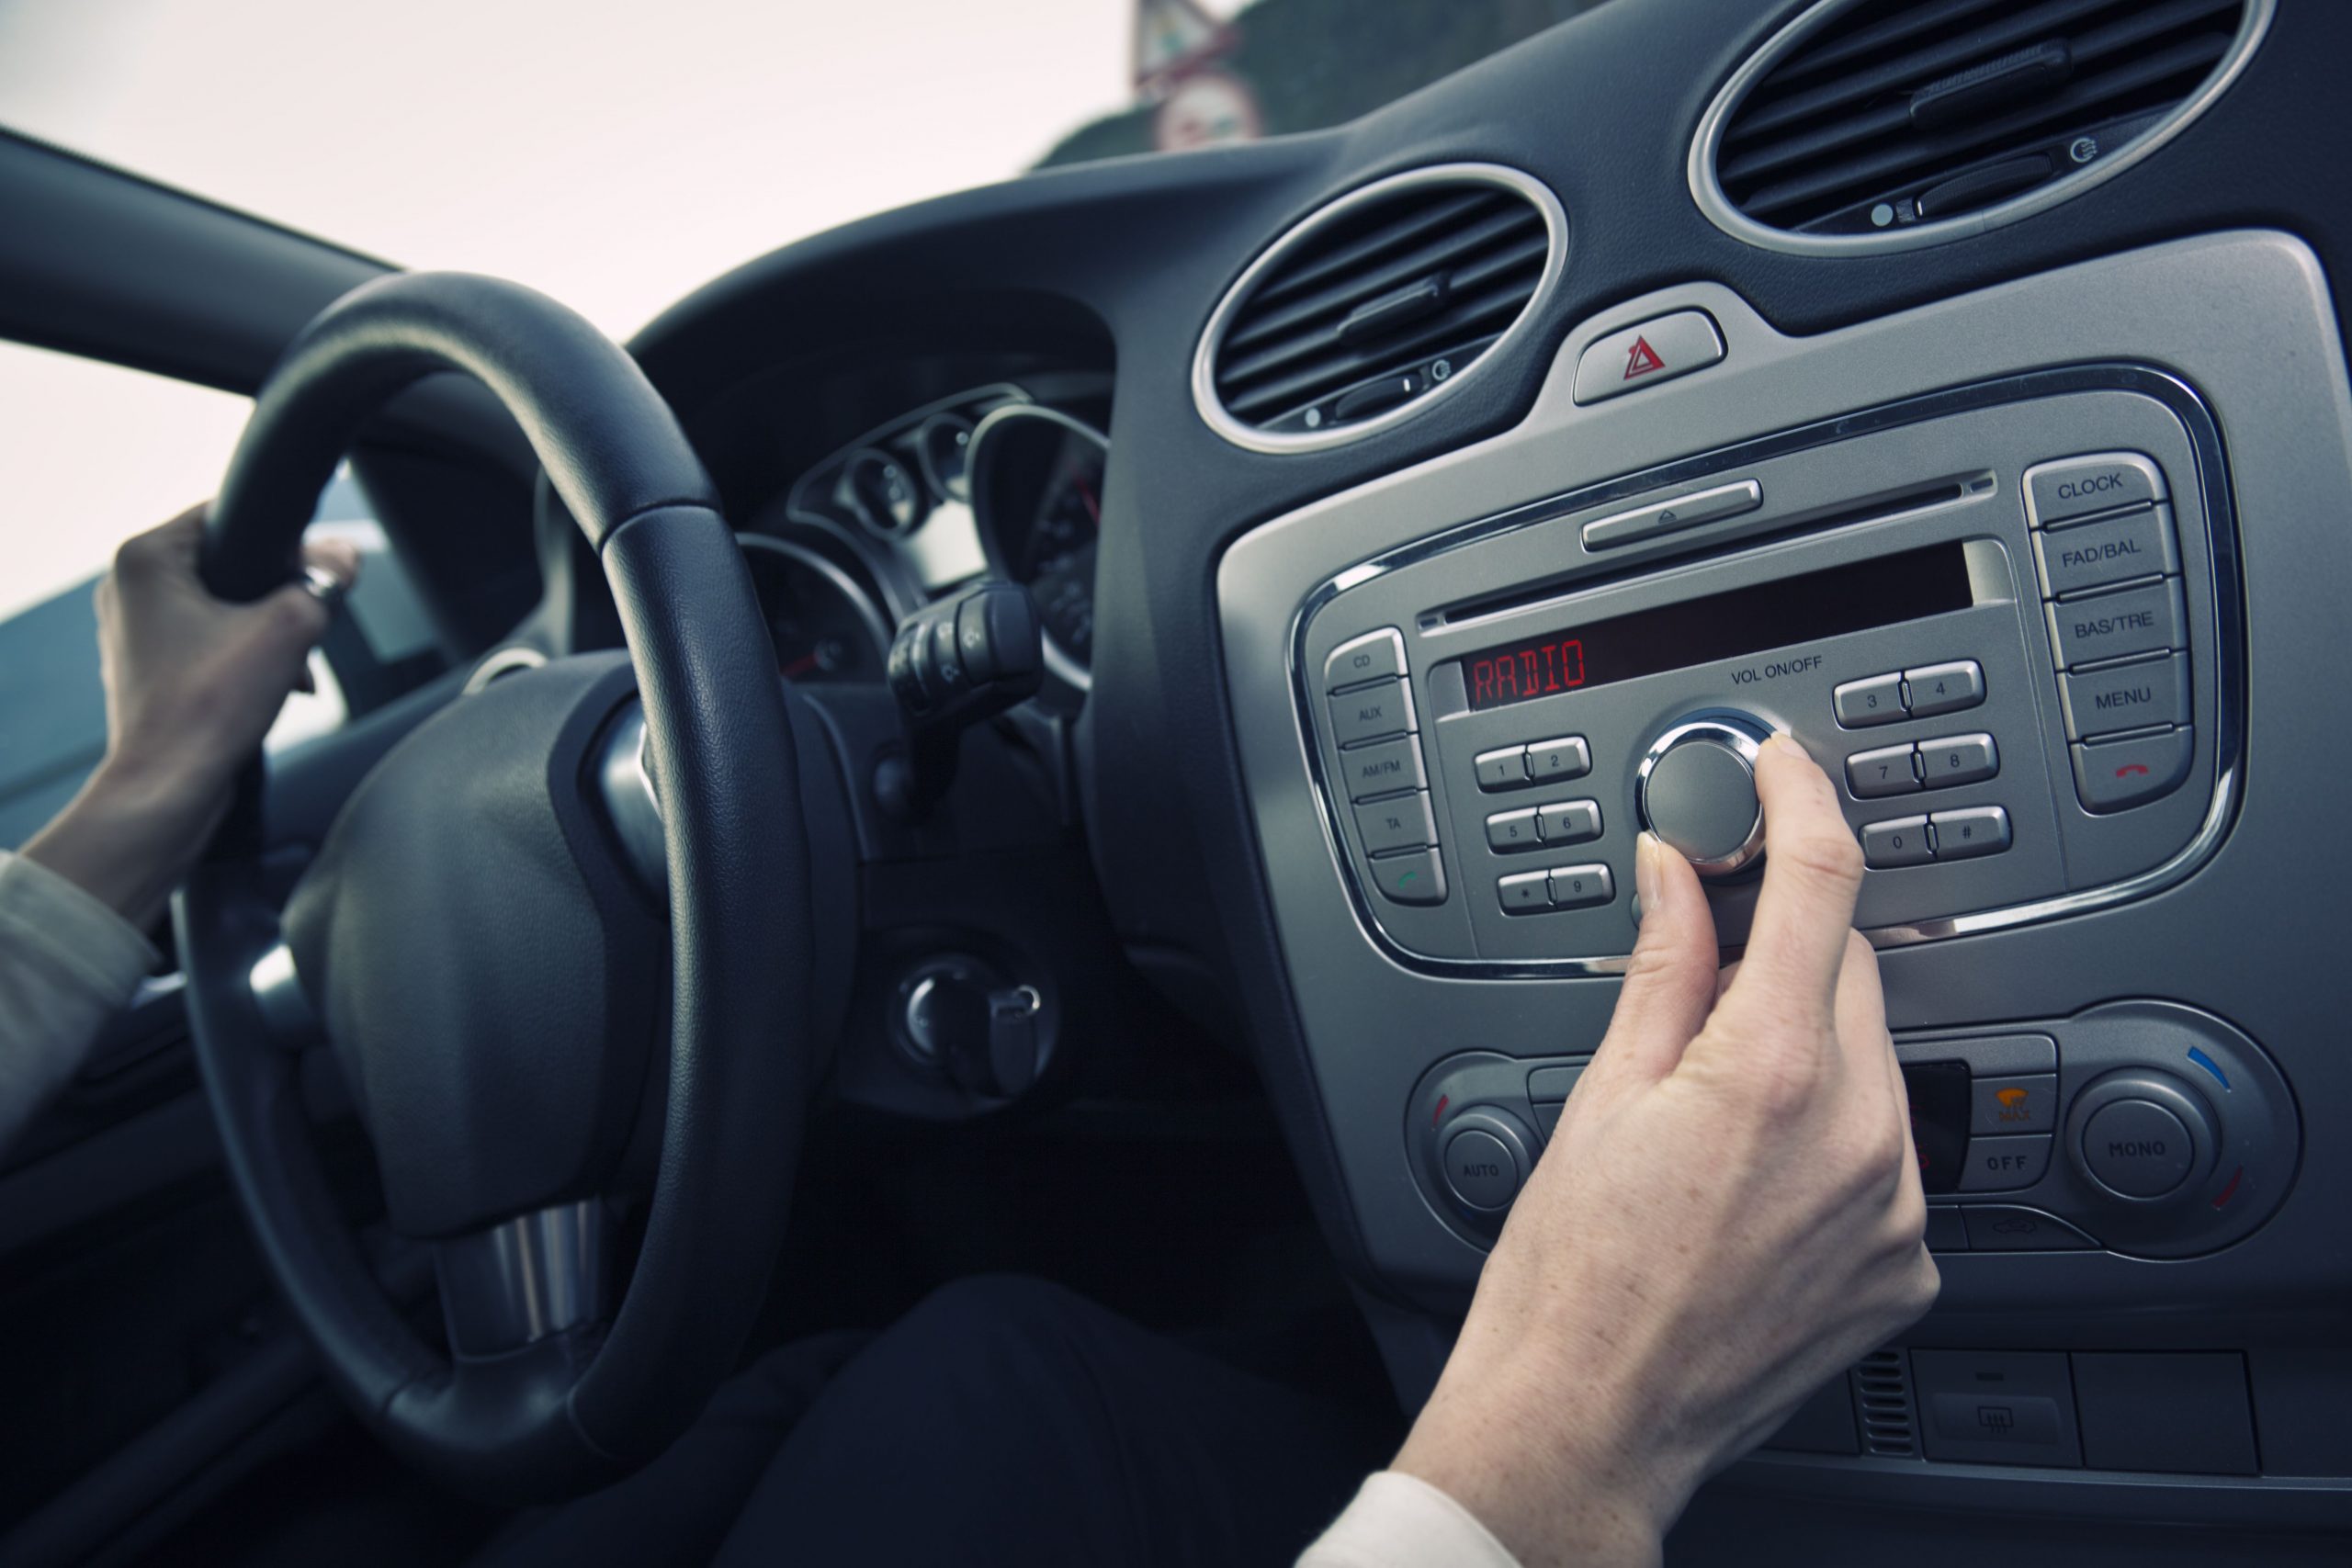 7 Common Issues with Radios in Cars that You Could Deal With Them Yourself